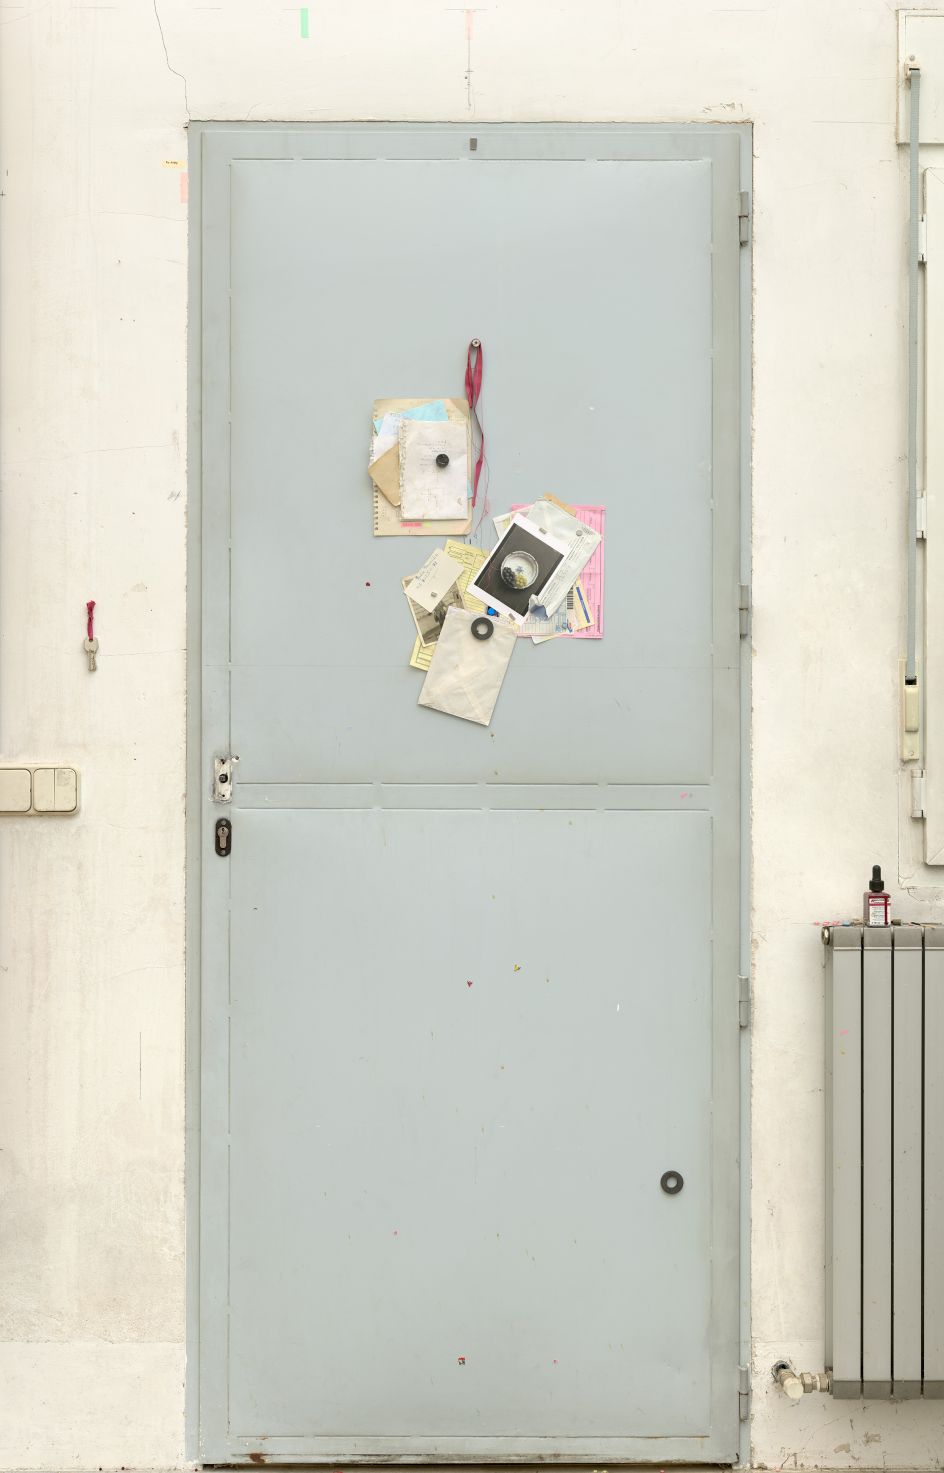 Things in a Room (Untitled #6) © Manuel Franquelo | Courtesy of Michael Hoppen Gallery